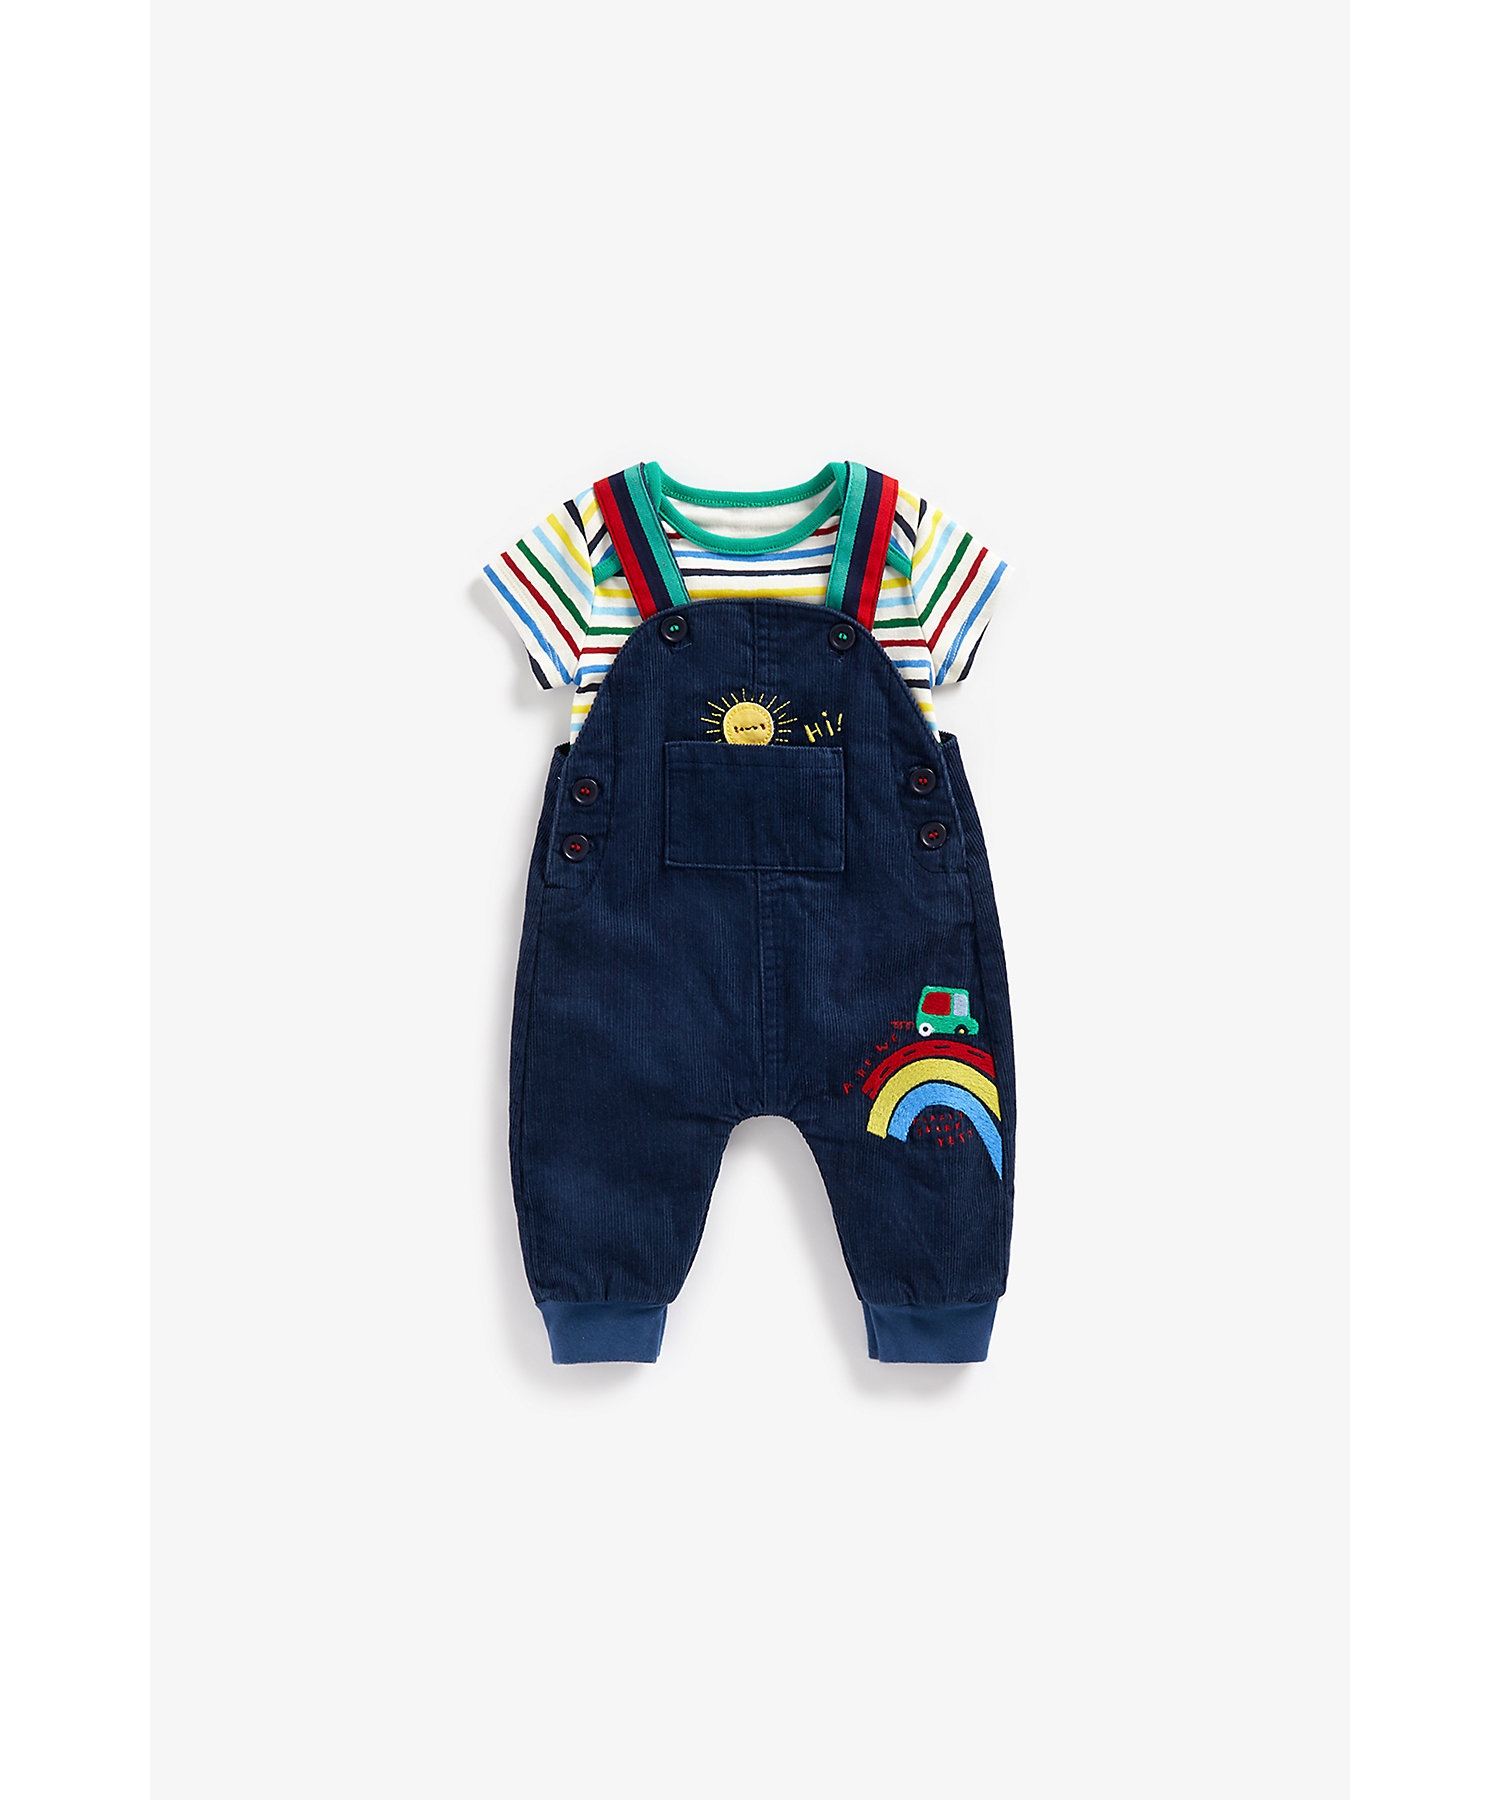 Mothercare | Boys Half Sleeves Dungaree Onesies Set Embroidery & Appliqué-Blue